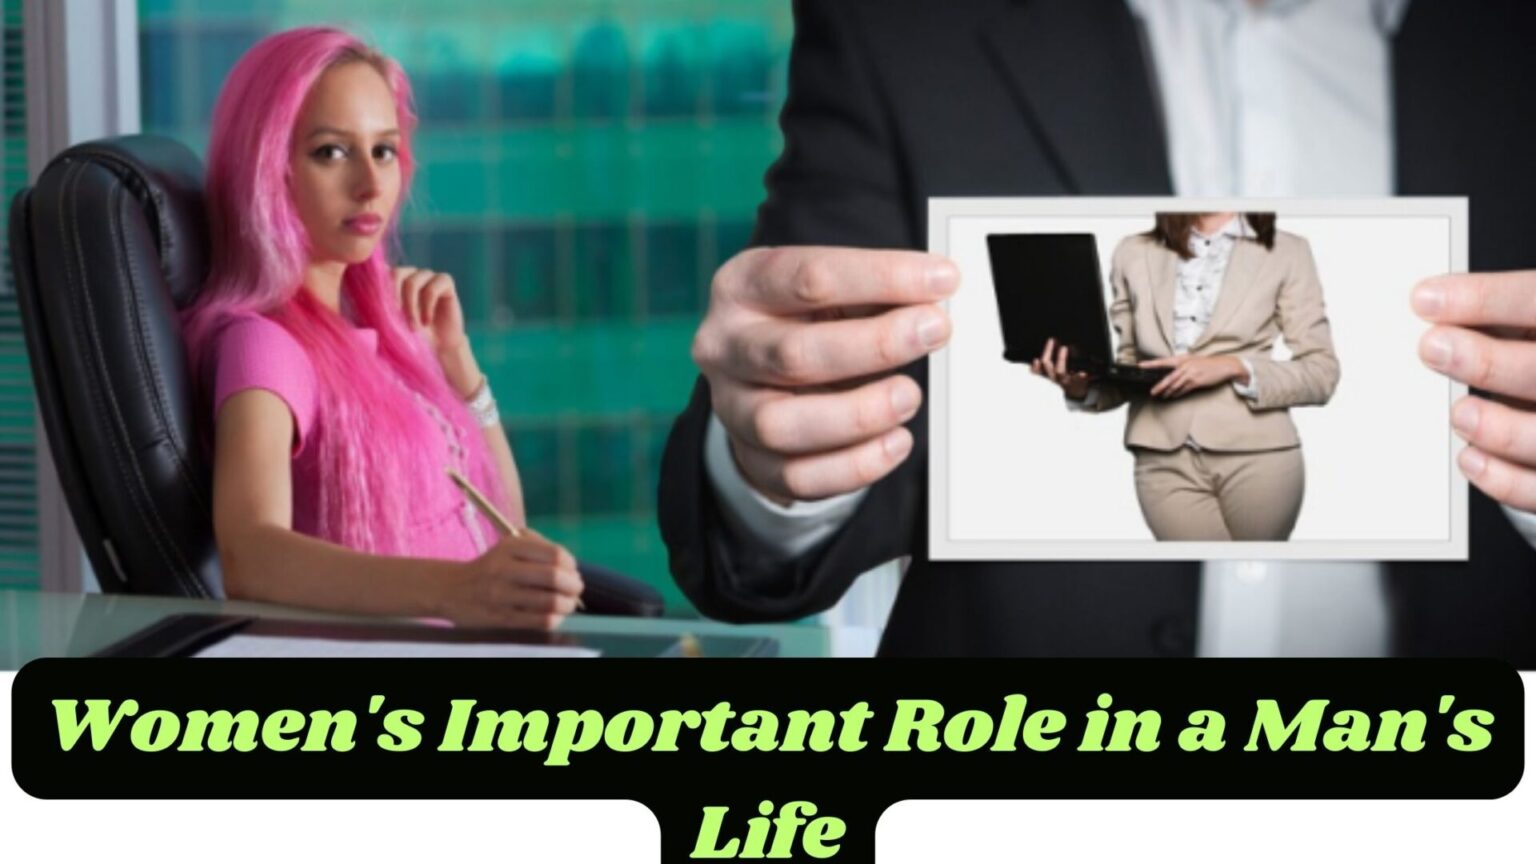 Women's Important Role in a Man's Life